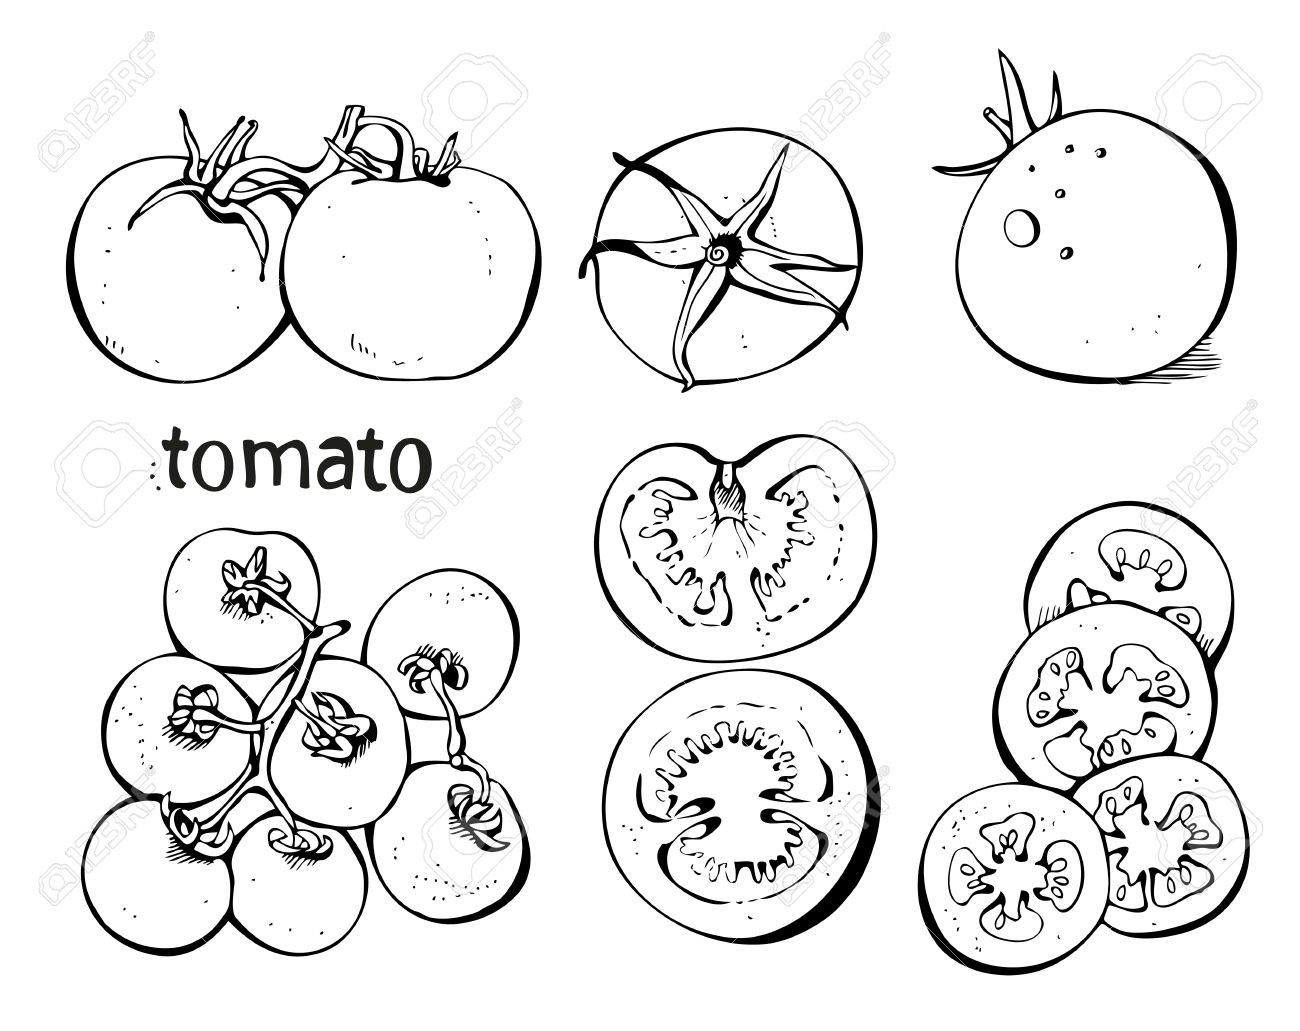 Tomato Slice Drawing at GetDrawings.com | Free for personal use Tomato